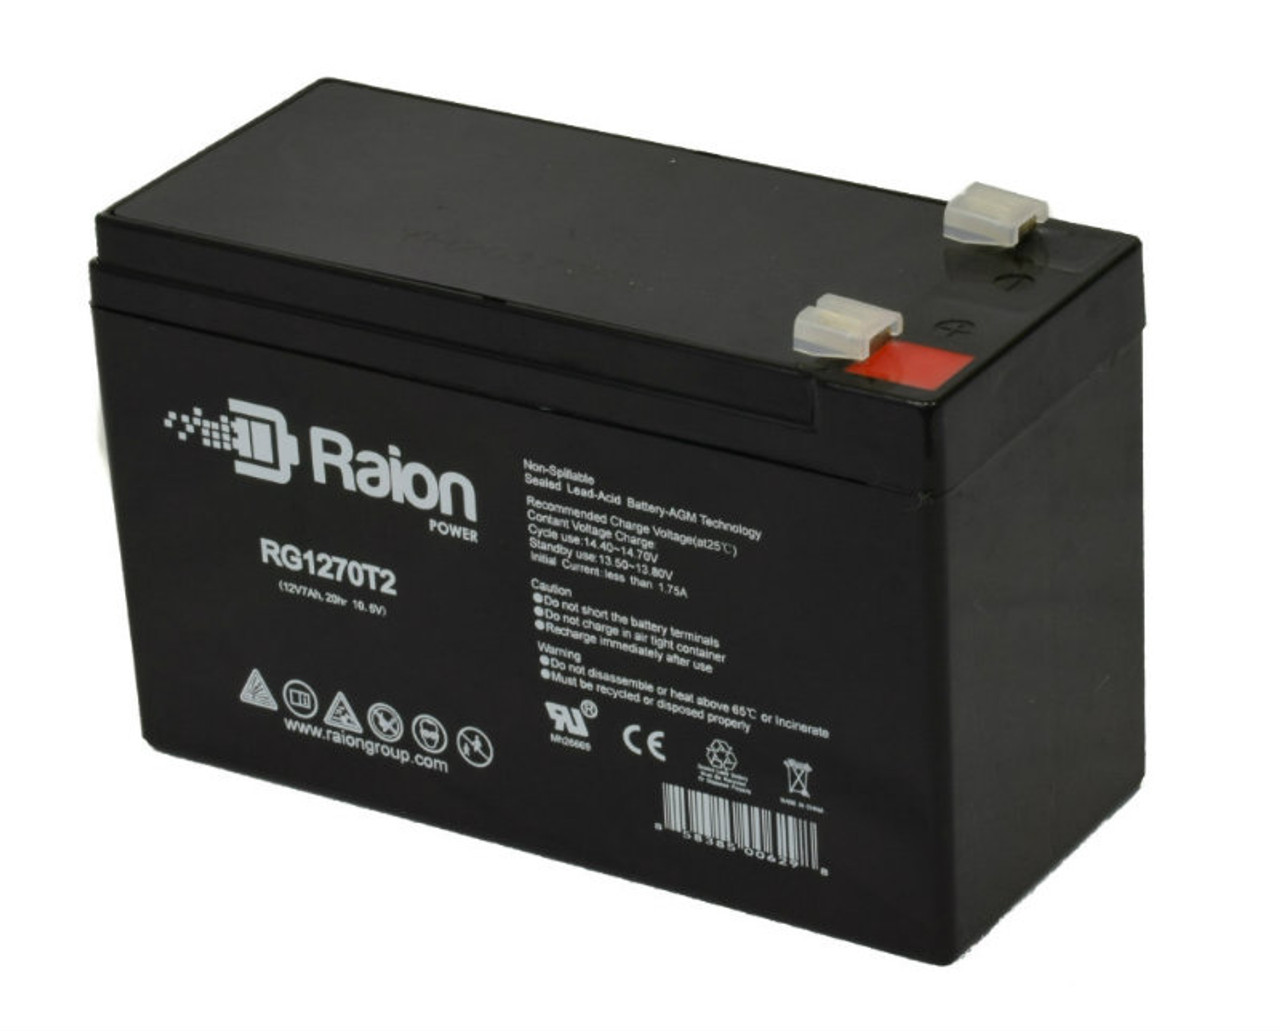 Raion Power Replacement 12V 7Ah RG1270T1 Fire Alarm Battery for Altronix SMP3PMCTXPD8